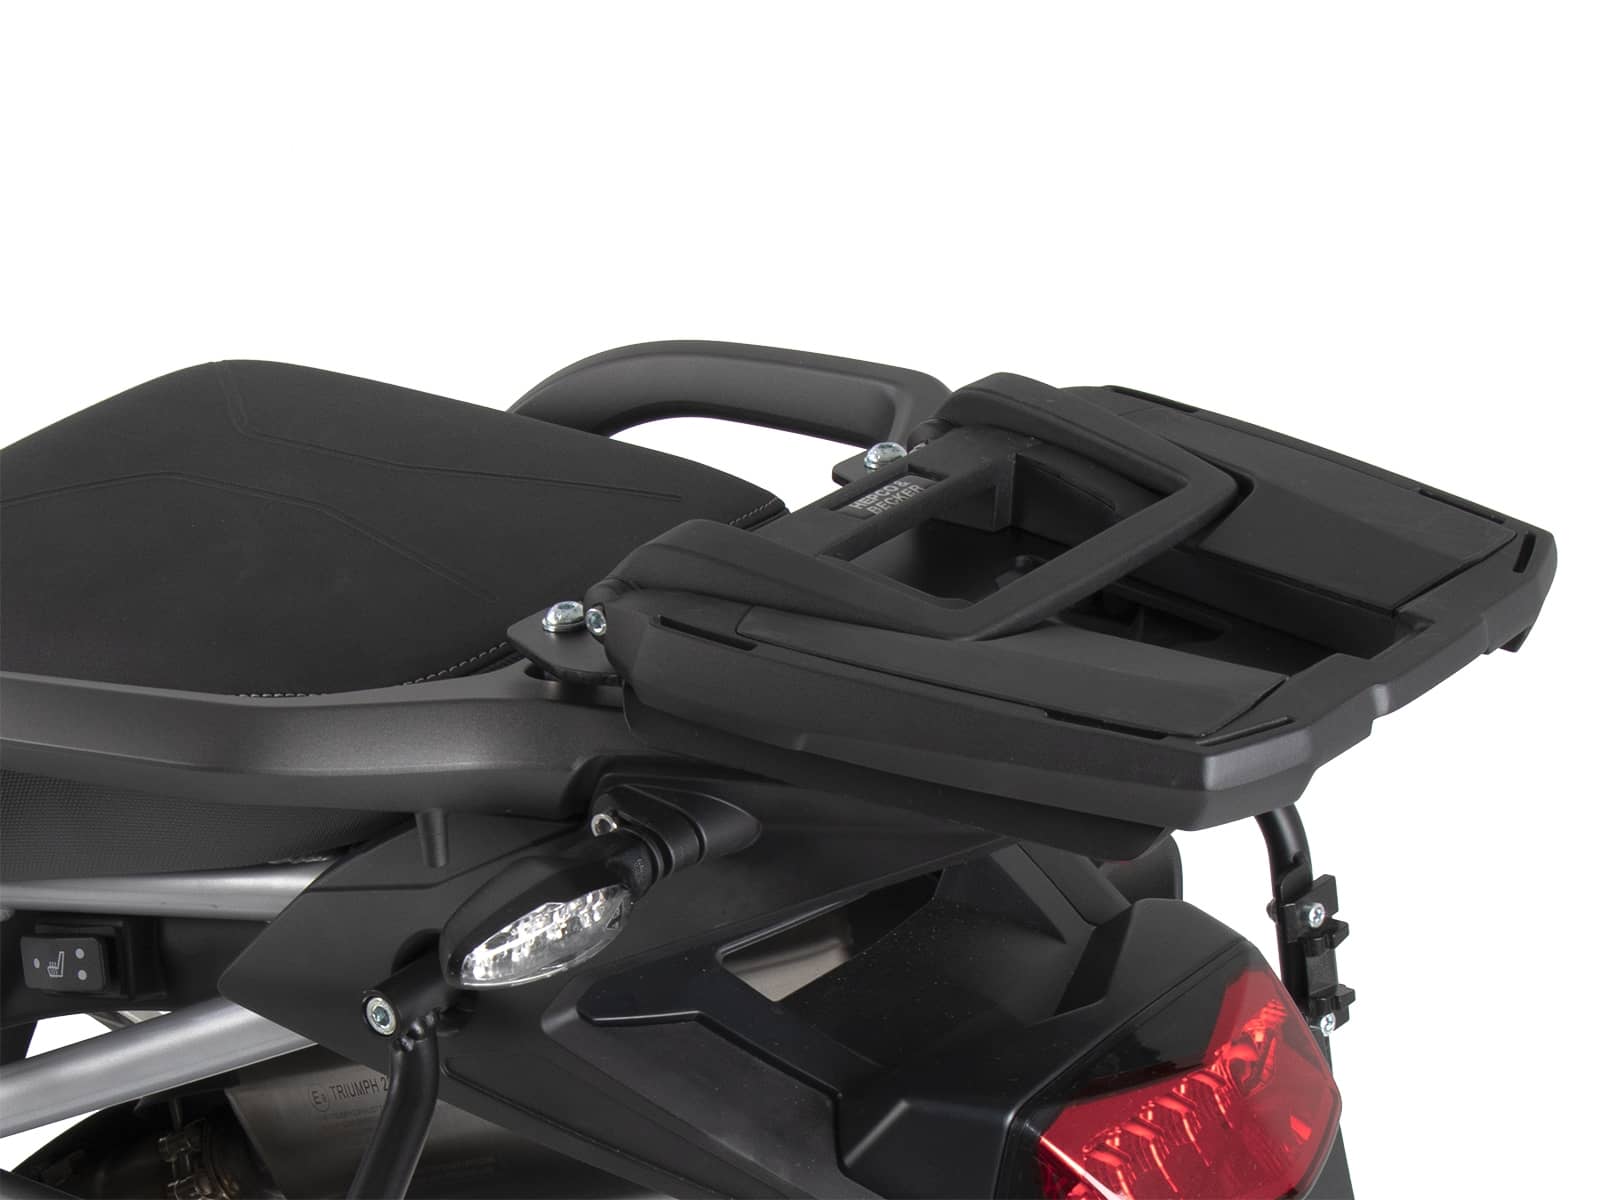 Easyrack topcasecarrier black for combination with original rear rack for Triumph Tiger 900 / Rally / GT / PRO (2020-)